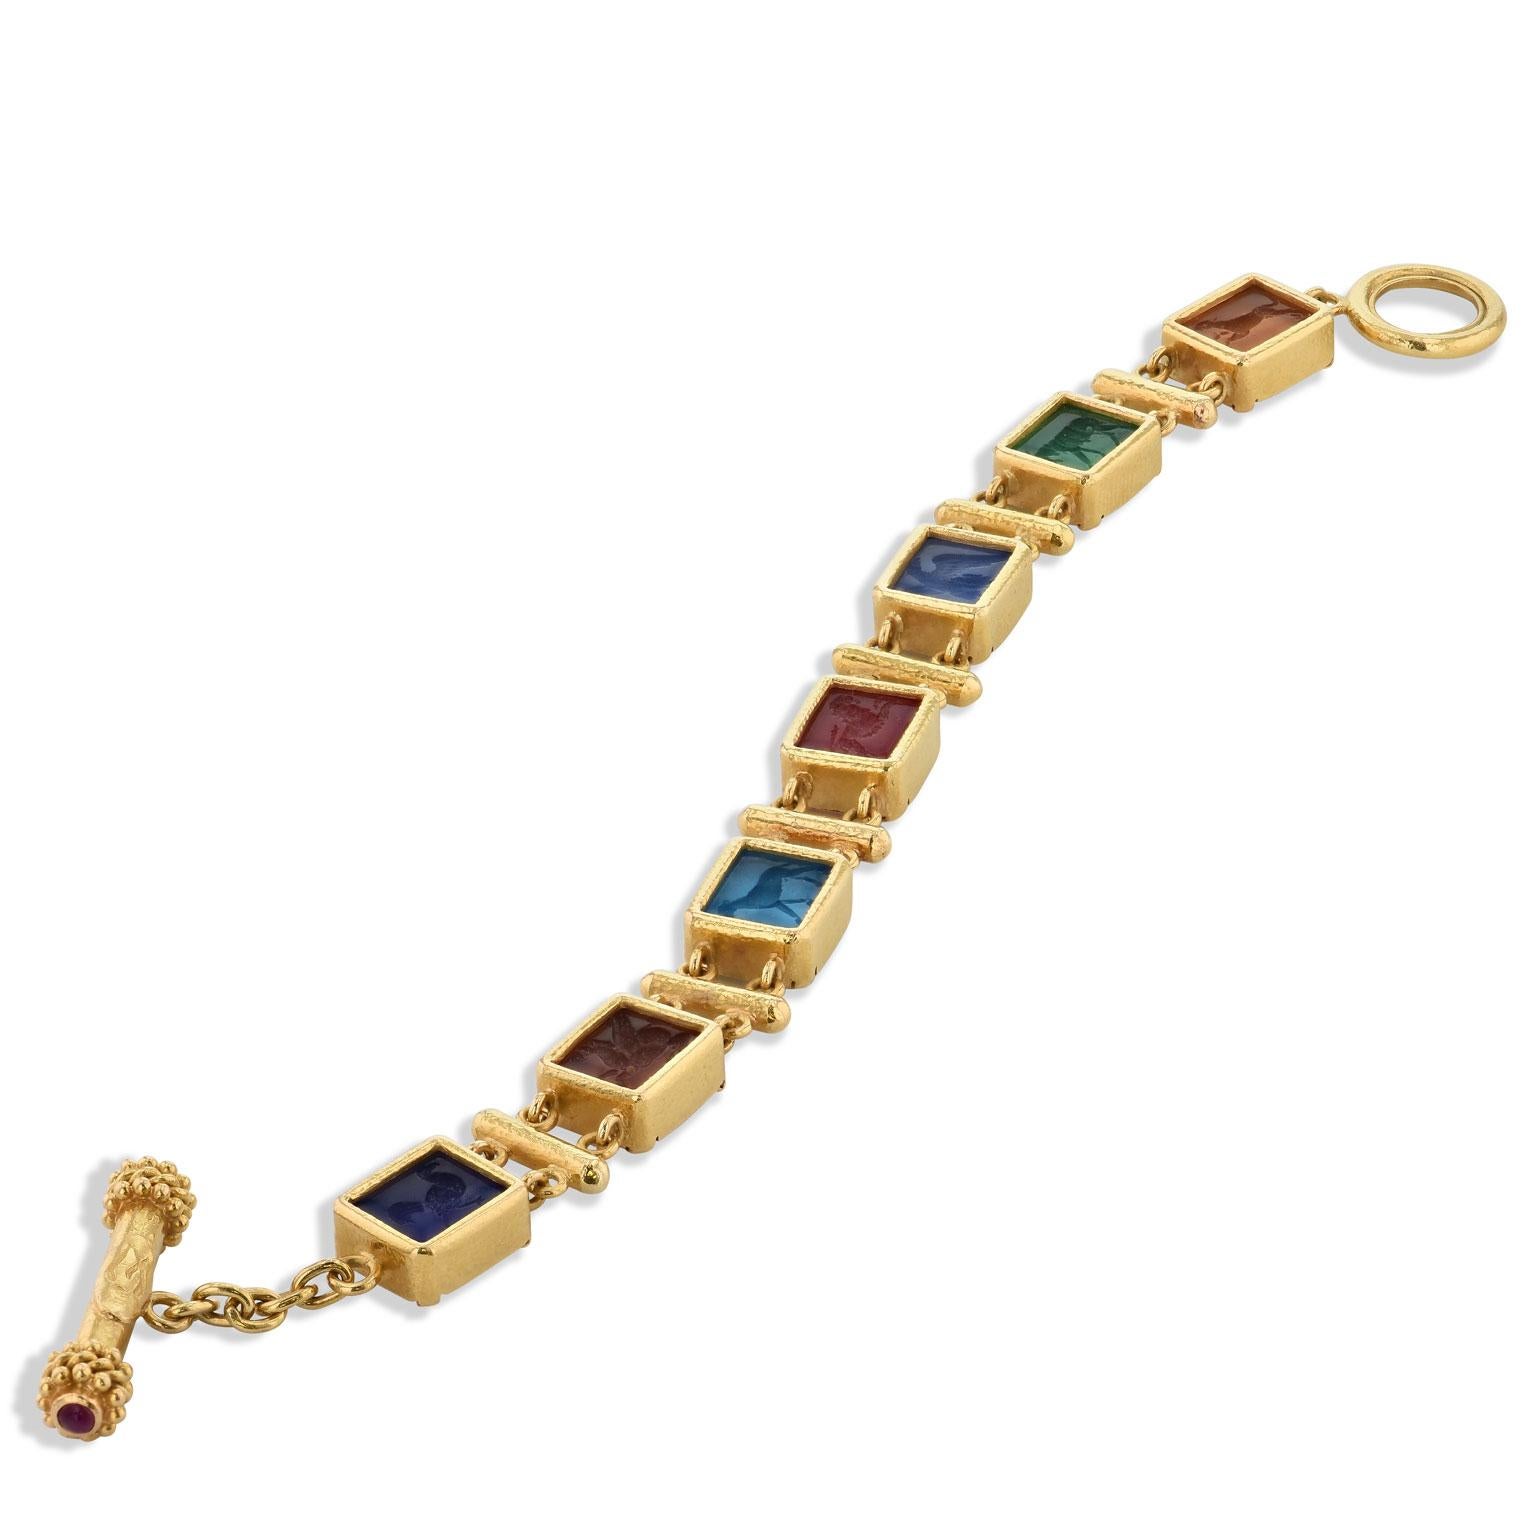 This previously loved Elizabeth Locke 19 karat yellow gold toggle bracelet features seven multi-color intaglio incised antique animals in Venetian glass. Measuring 11 millimeters wide, make a bold statement with this spirited piece (Retail $8,300).